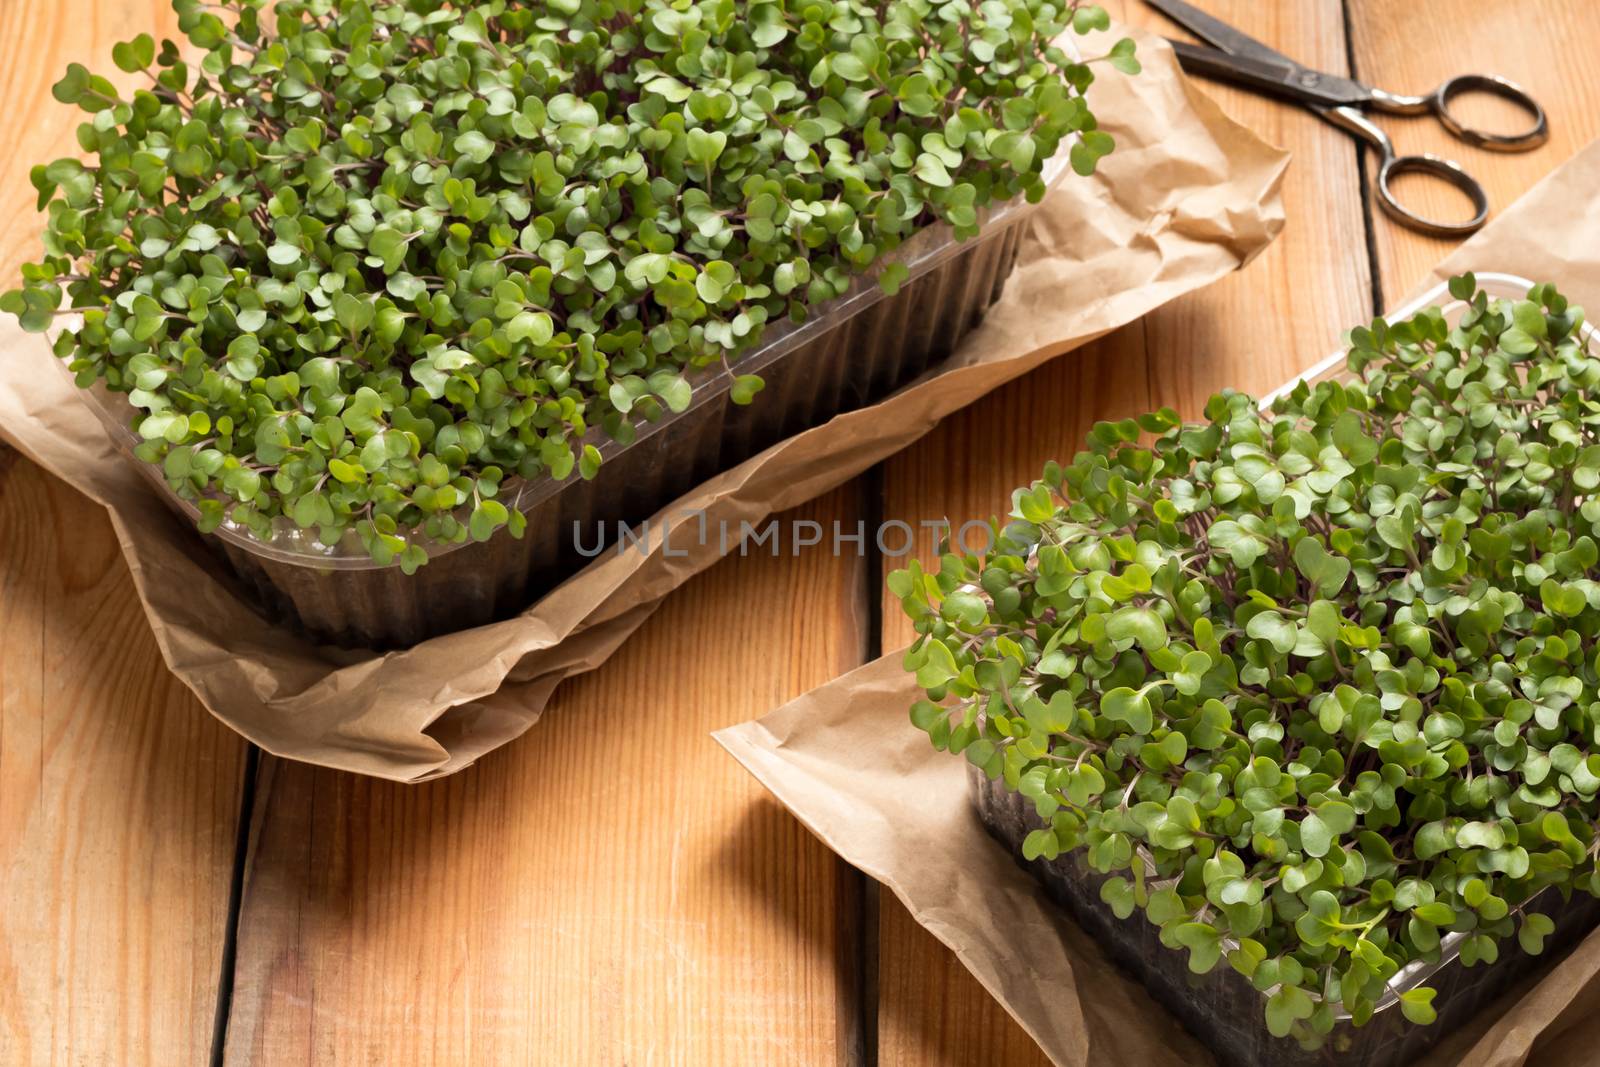 Homegrown broccoli and kale microgreens on a wooden table